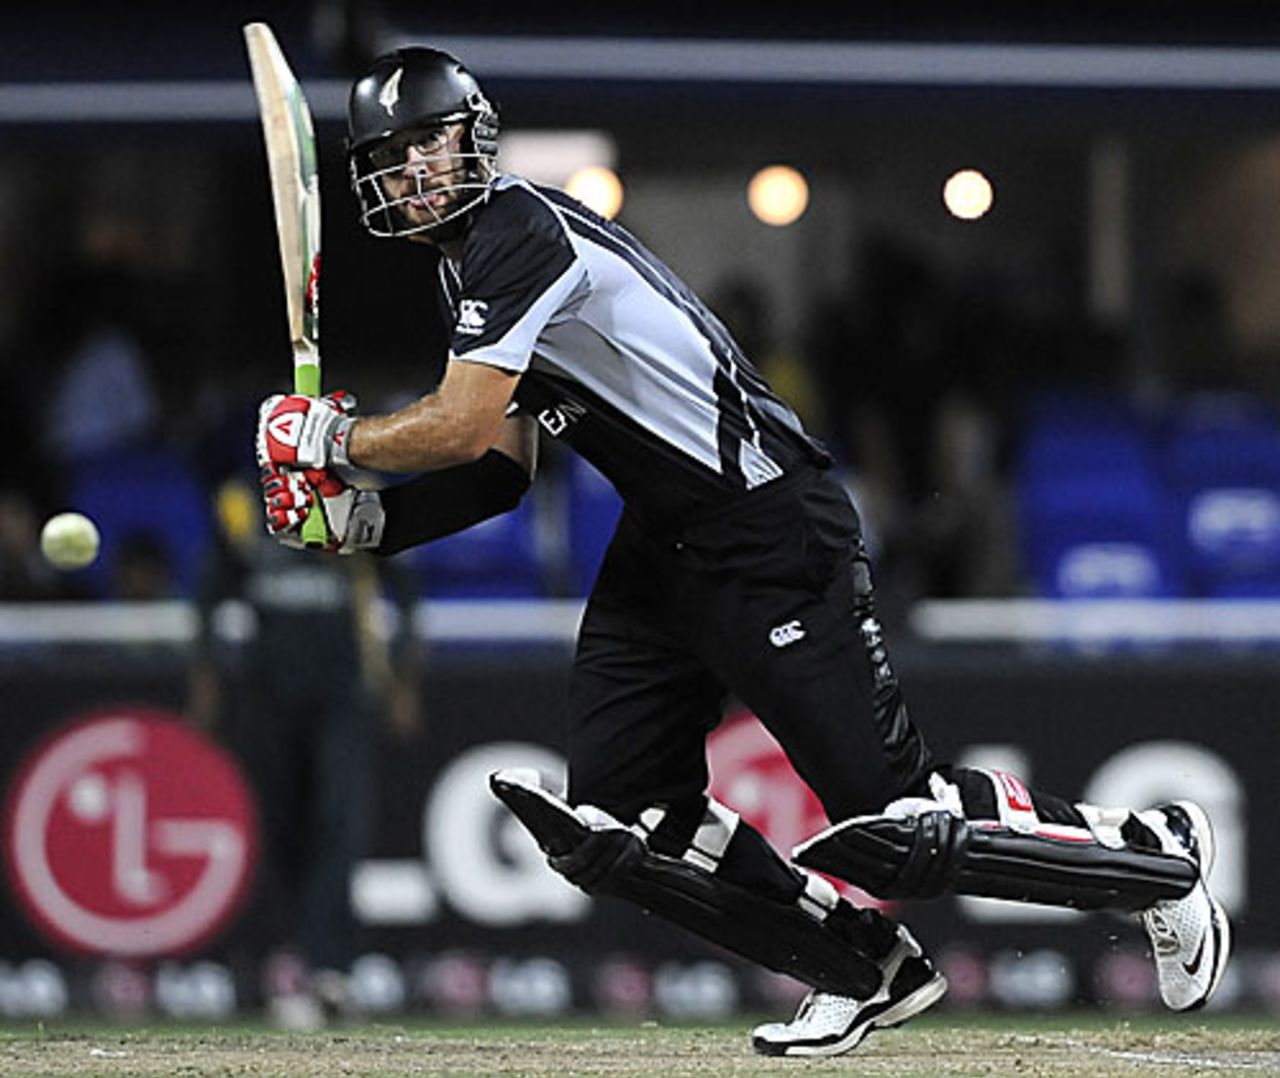 Daniel Vettori promoted himself up the order and the move worked, New Zealand v Pakistan, ICC Champions Trophy, 2nd semi-final, Johannesburg, October 3, 2009